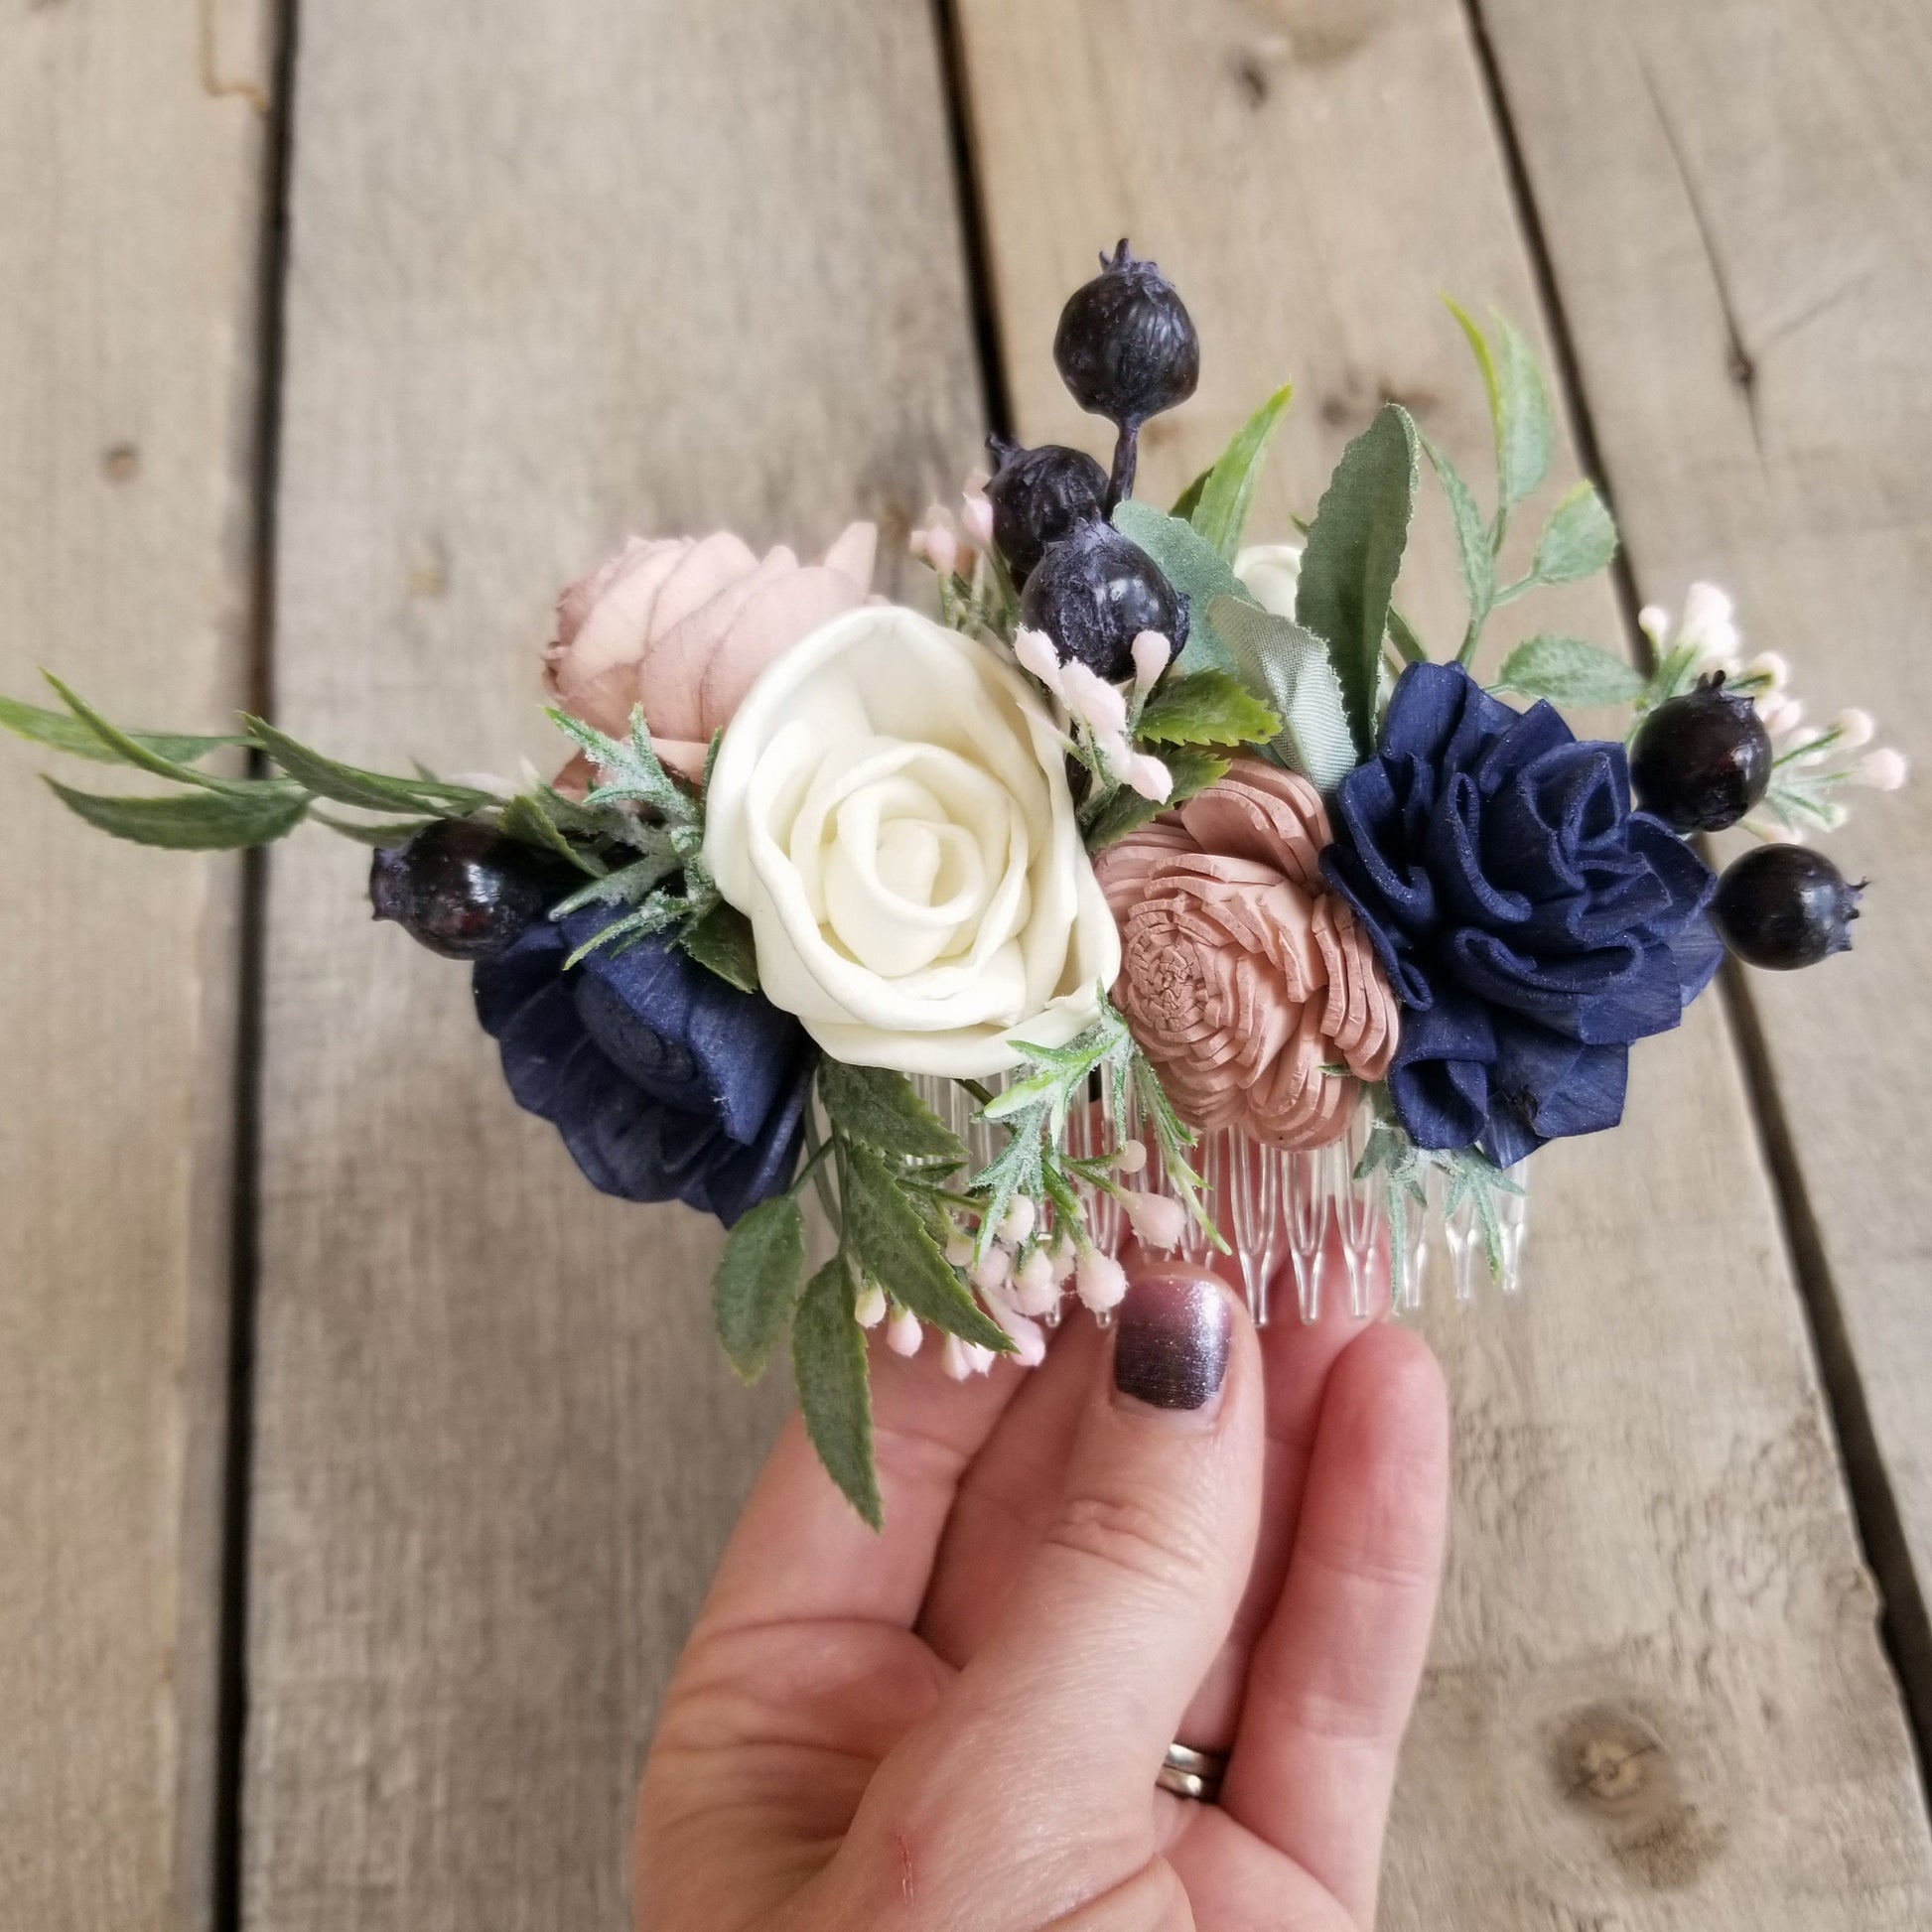 Bridal Hair Comb with Wood Flowers, Navy and Blush Wedding Flowers, Flower Comb for Bride, Bridal Updo Hair Piece